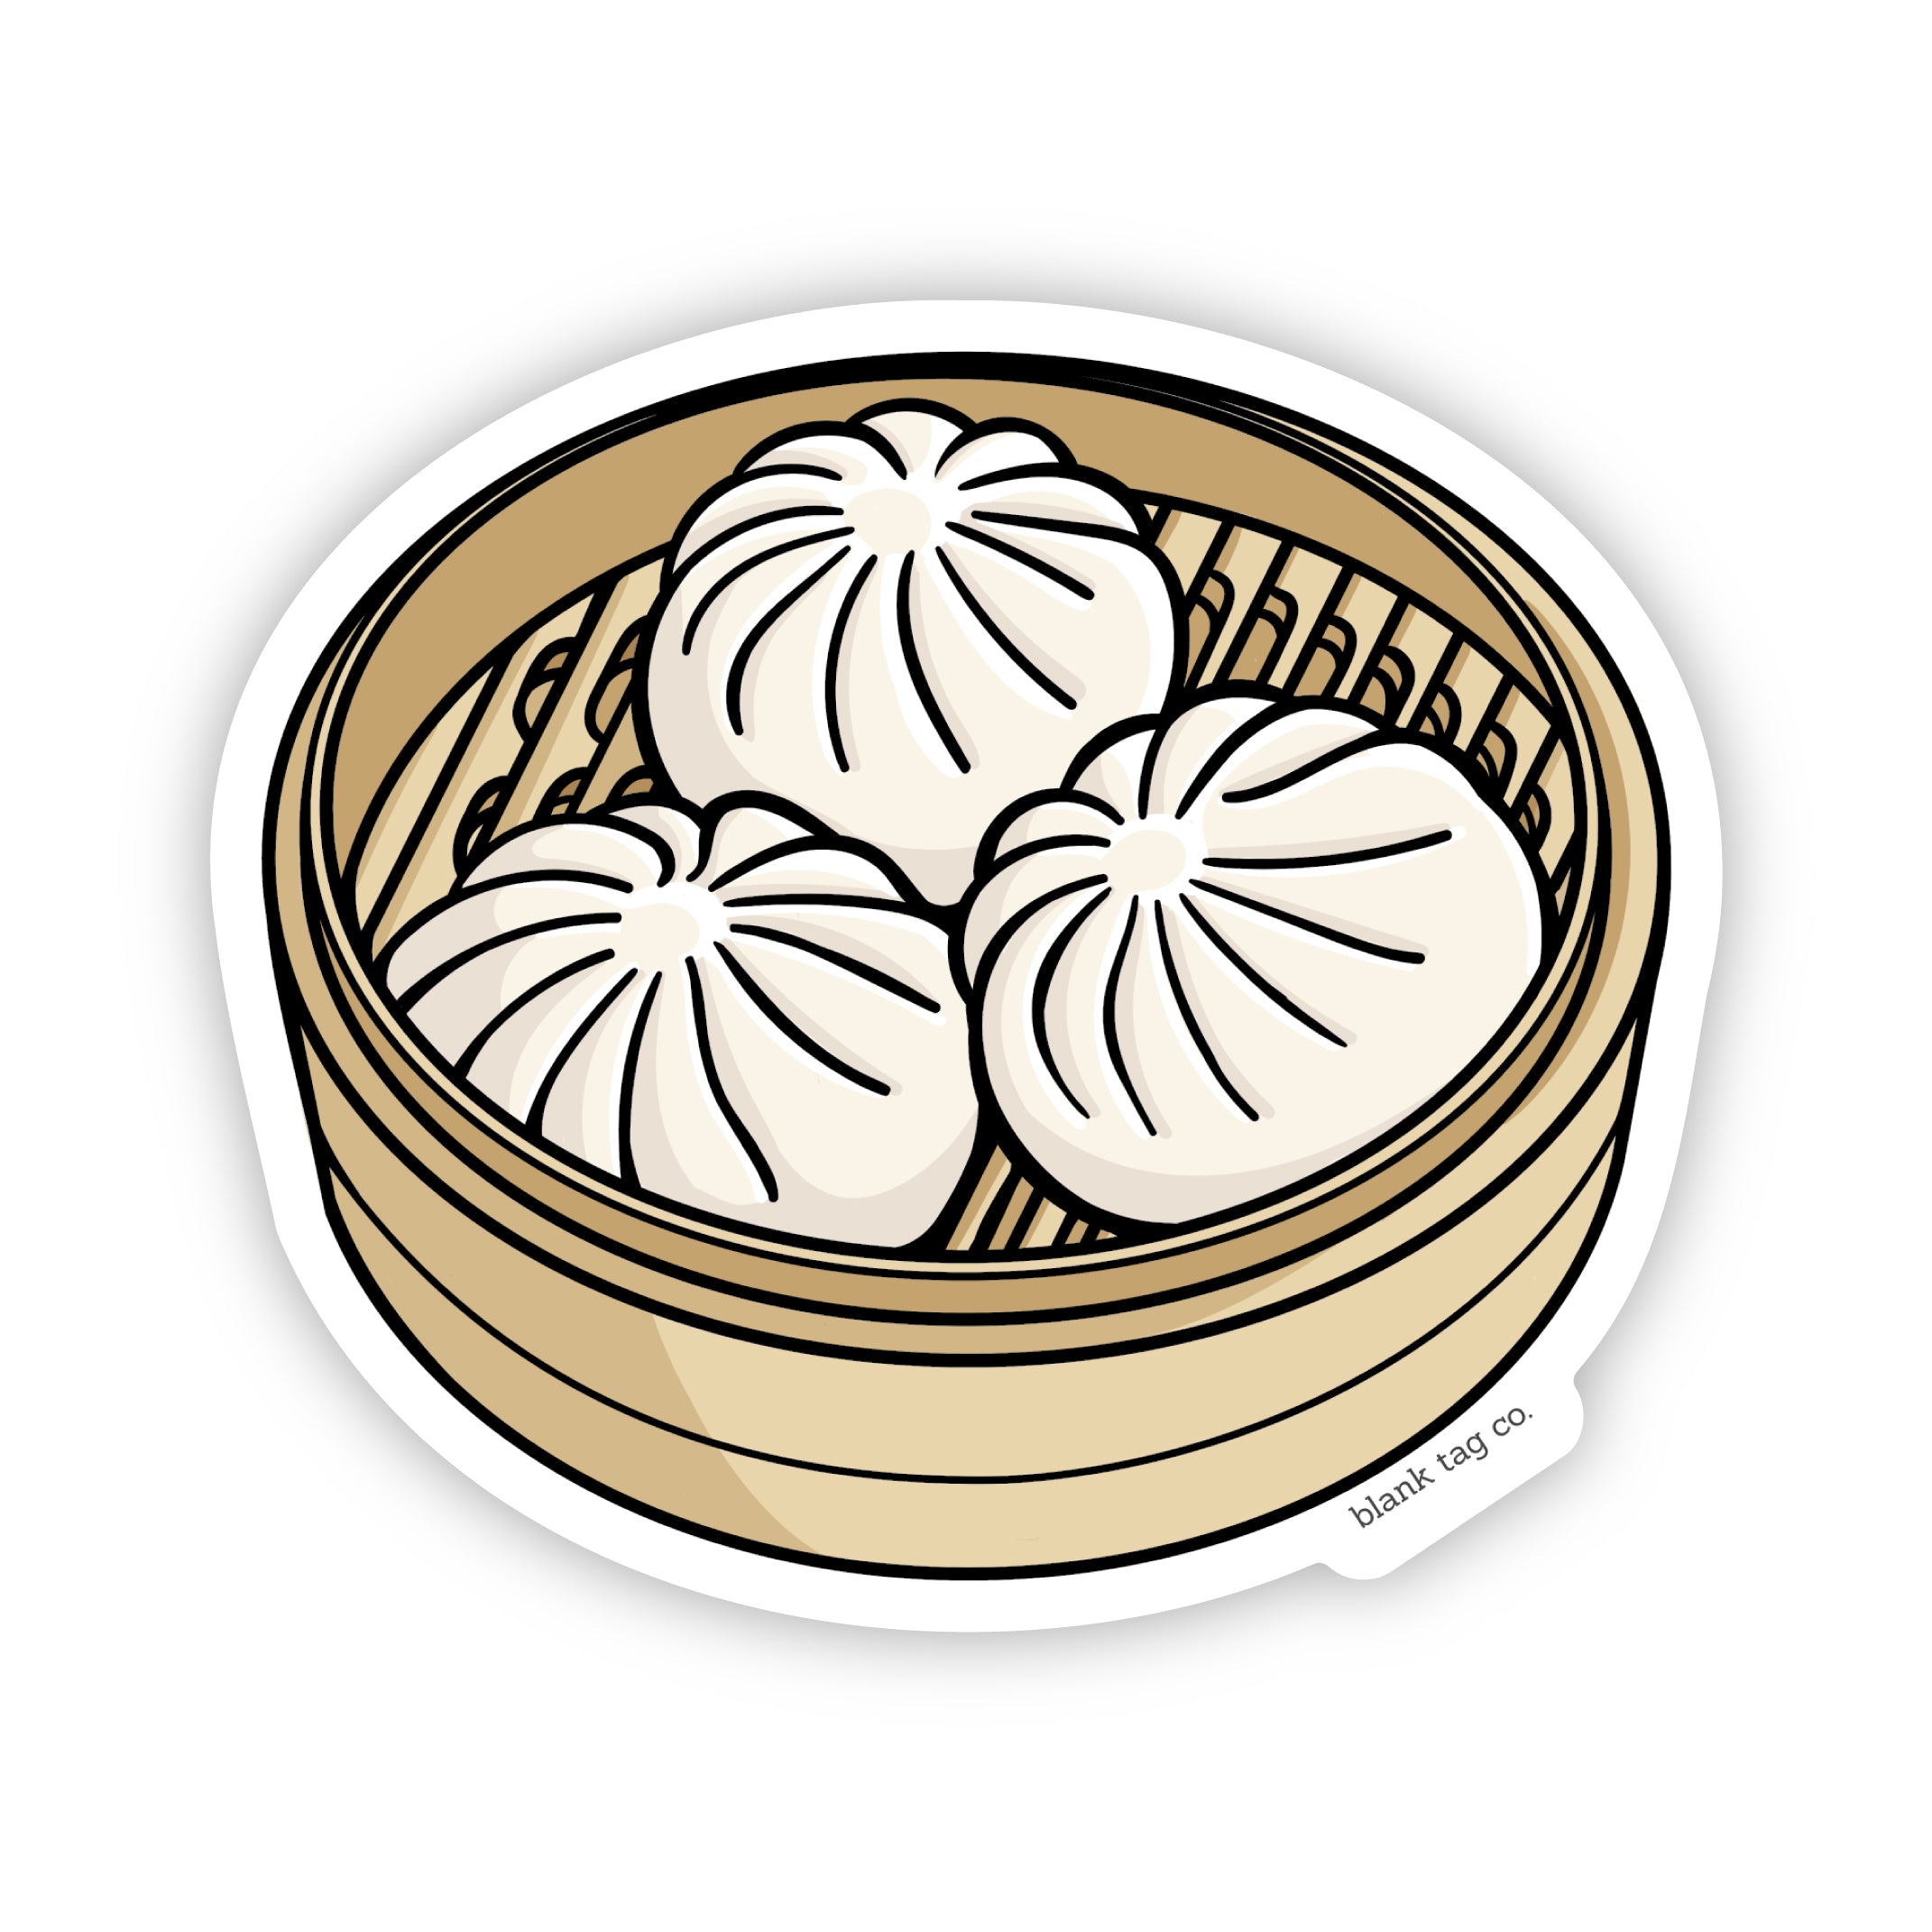 The Steamed Buns Sticker